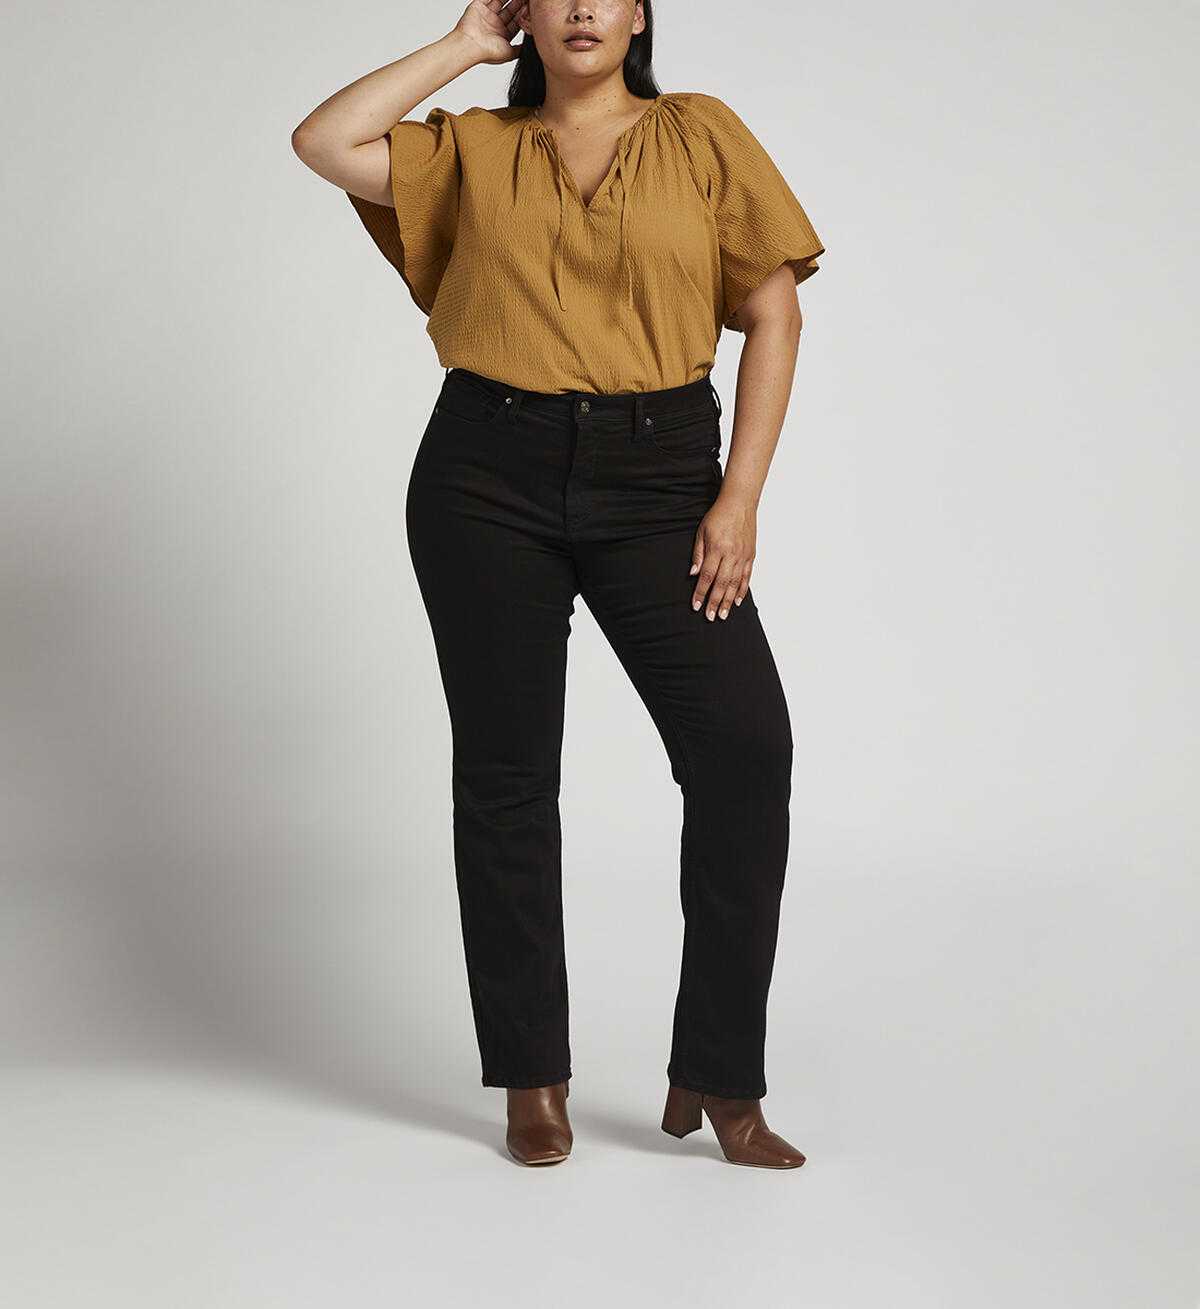 8 Best Jeans for Curvy Women, Tested and Reviewed